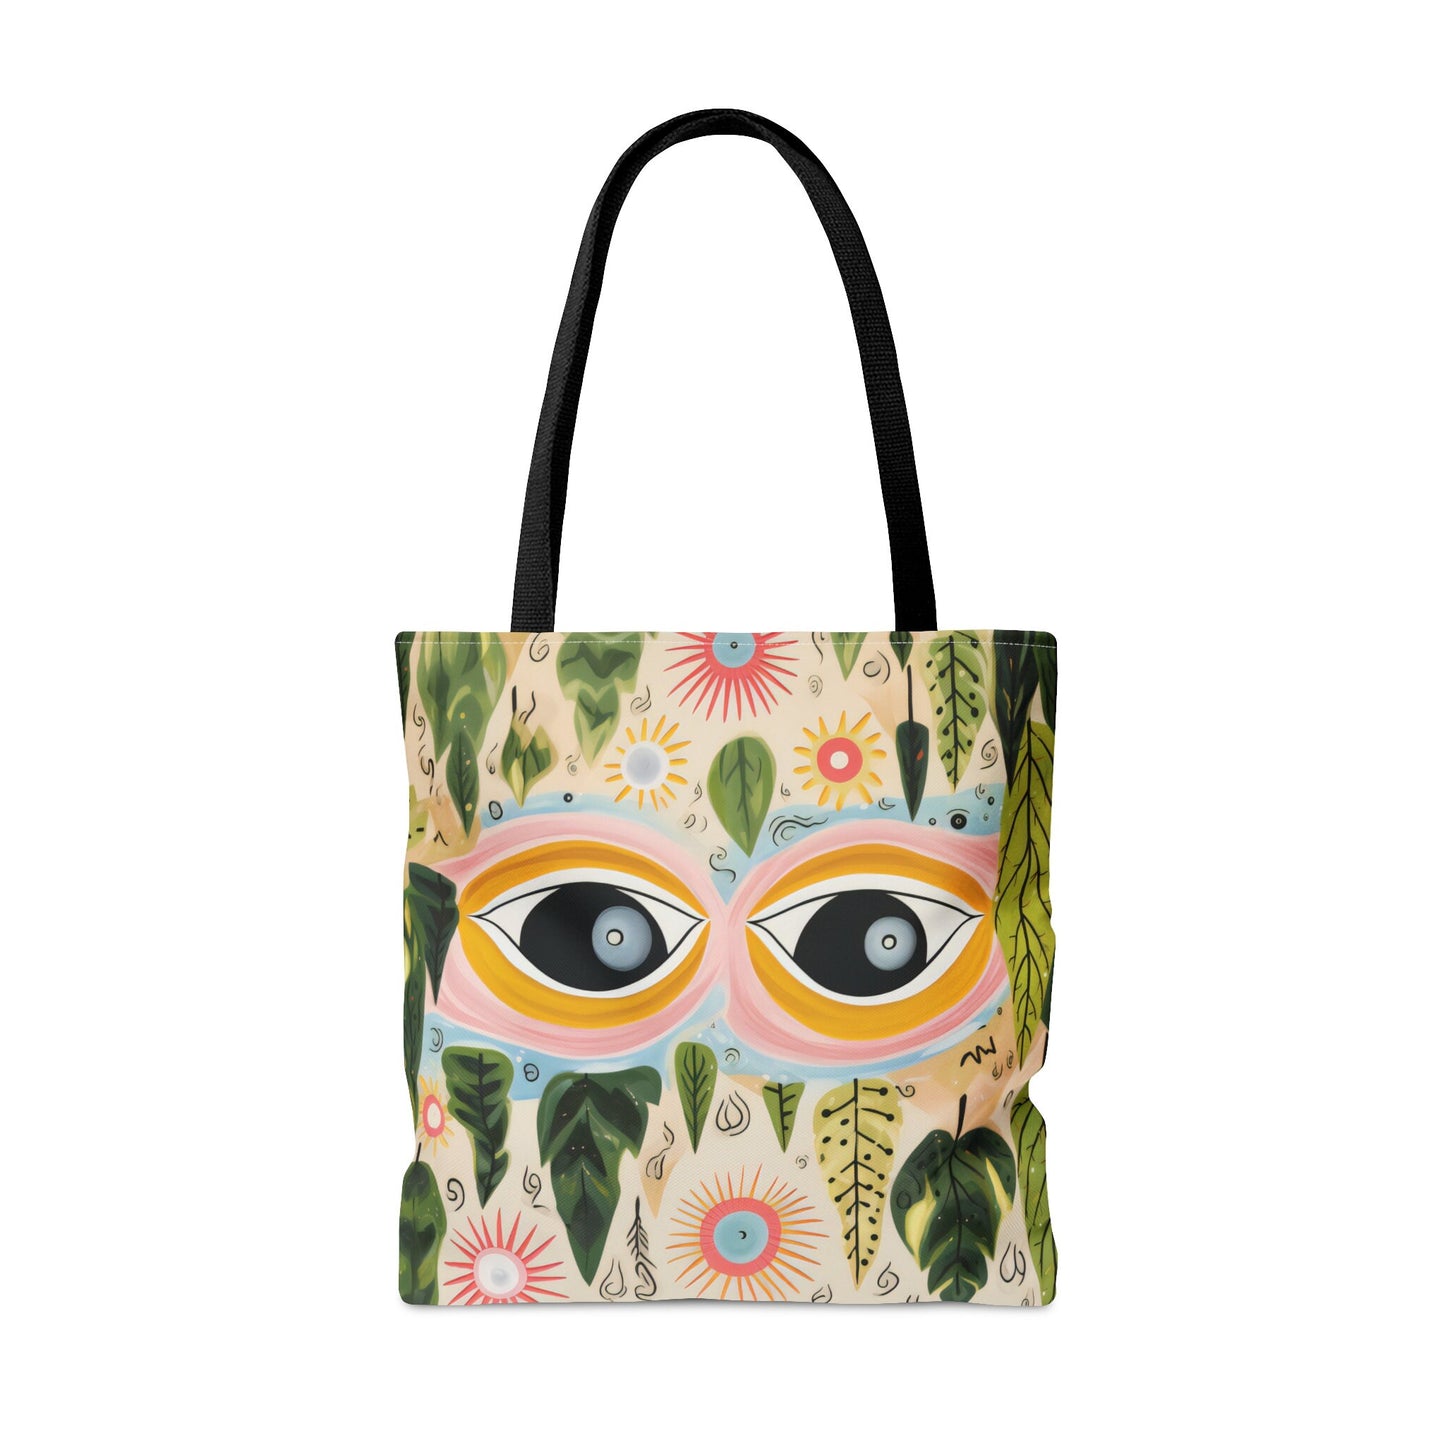 Magic Eyes Tote Bag • Printed Shopping Bag • Funny Tote Bag • Grocery Bag • Christmas Gift • Gift For Her • Cotton Bag • Perfect for Travel